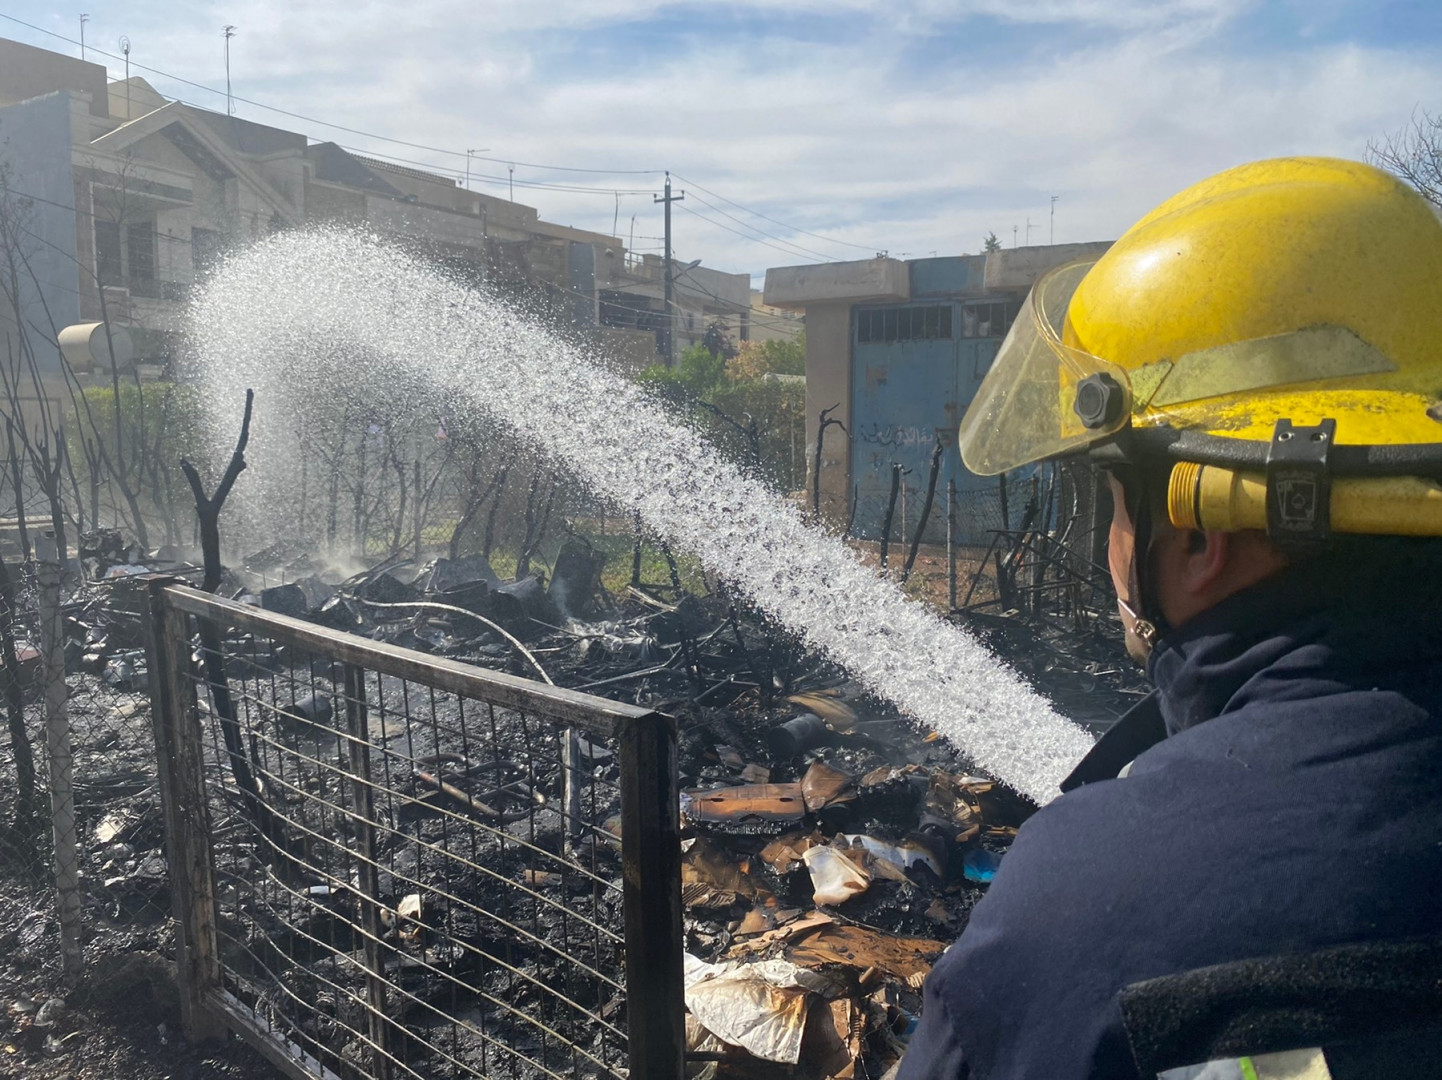 Fire erupted in a secondhand clothes market in Erbil